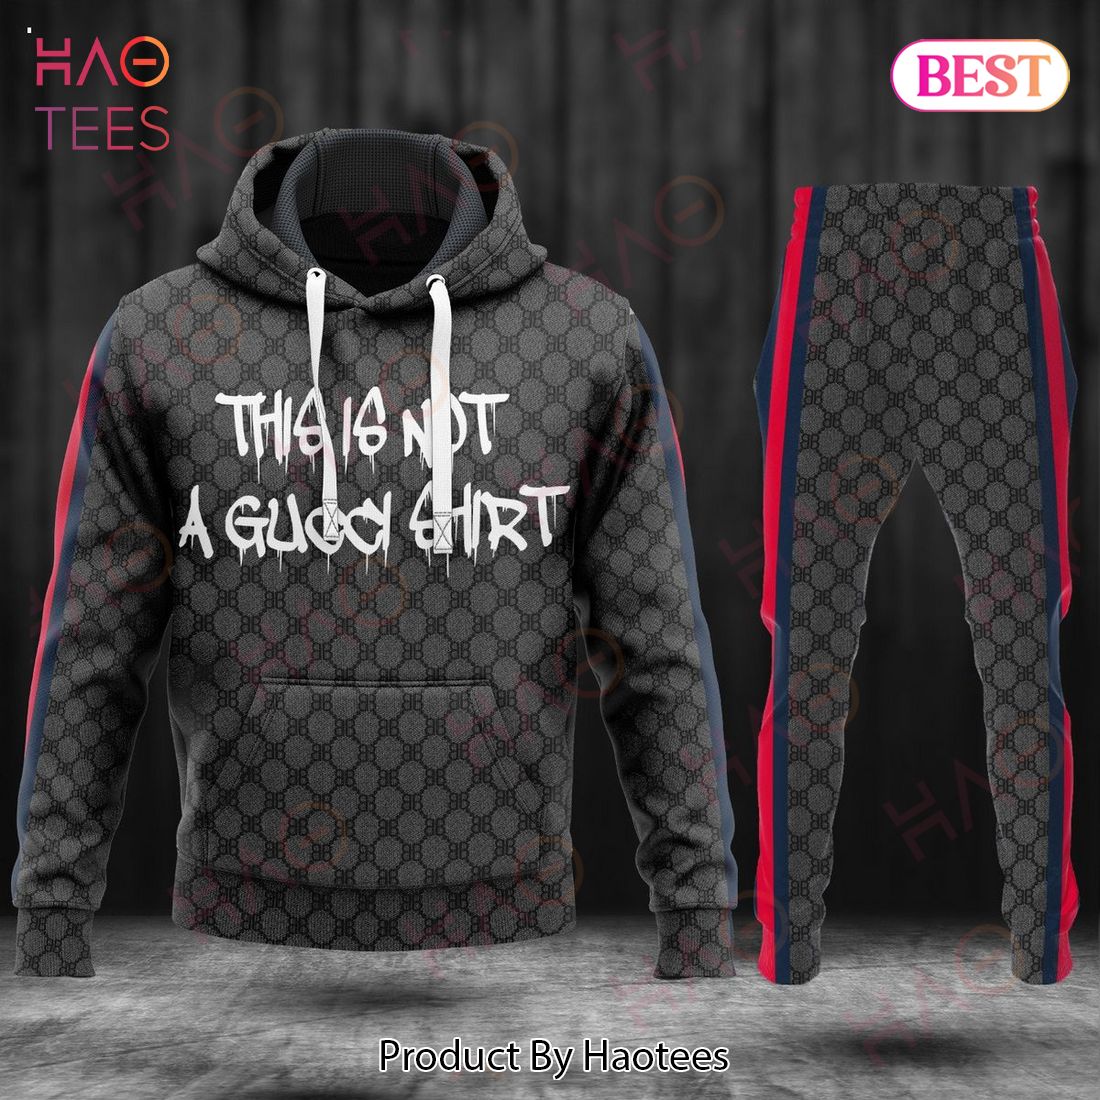 This Is A Gucci Shirt Black Color Luxury Brand Hoodie And Pants POD Design